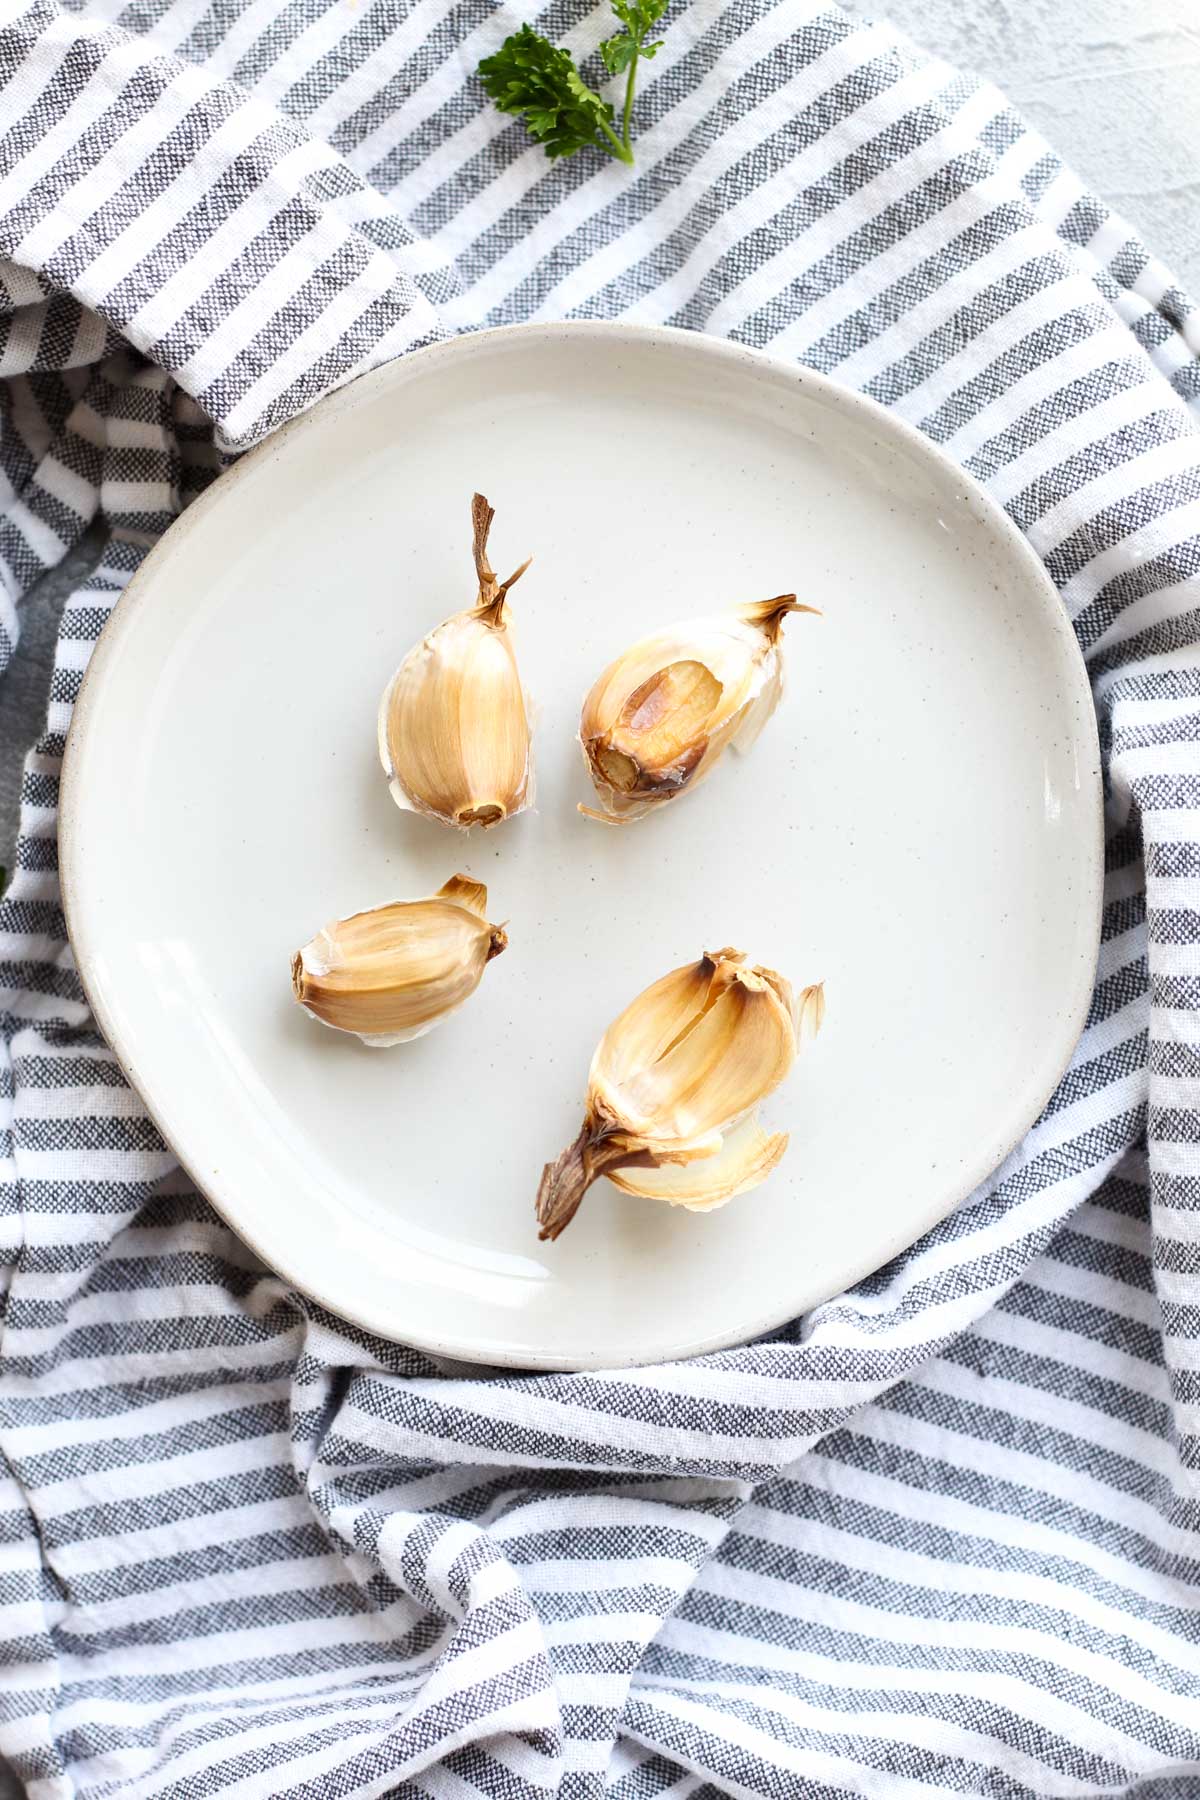 Roasted garlic on a white plate.